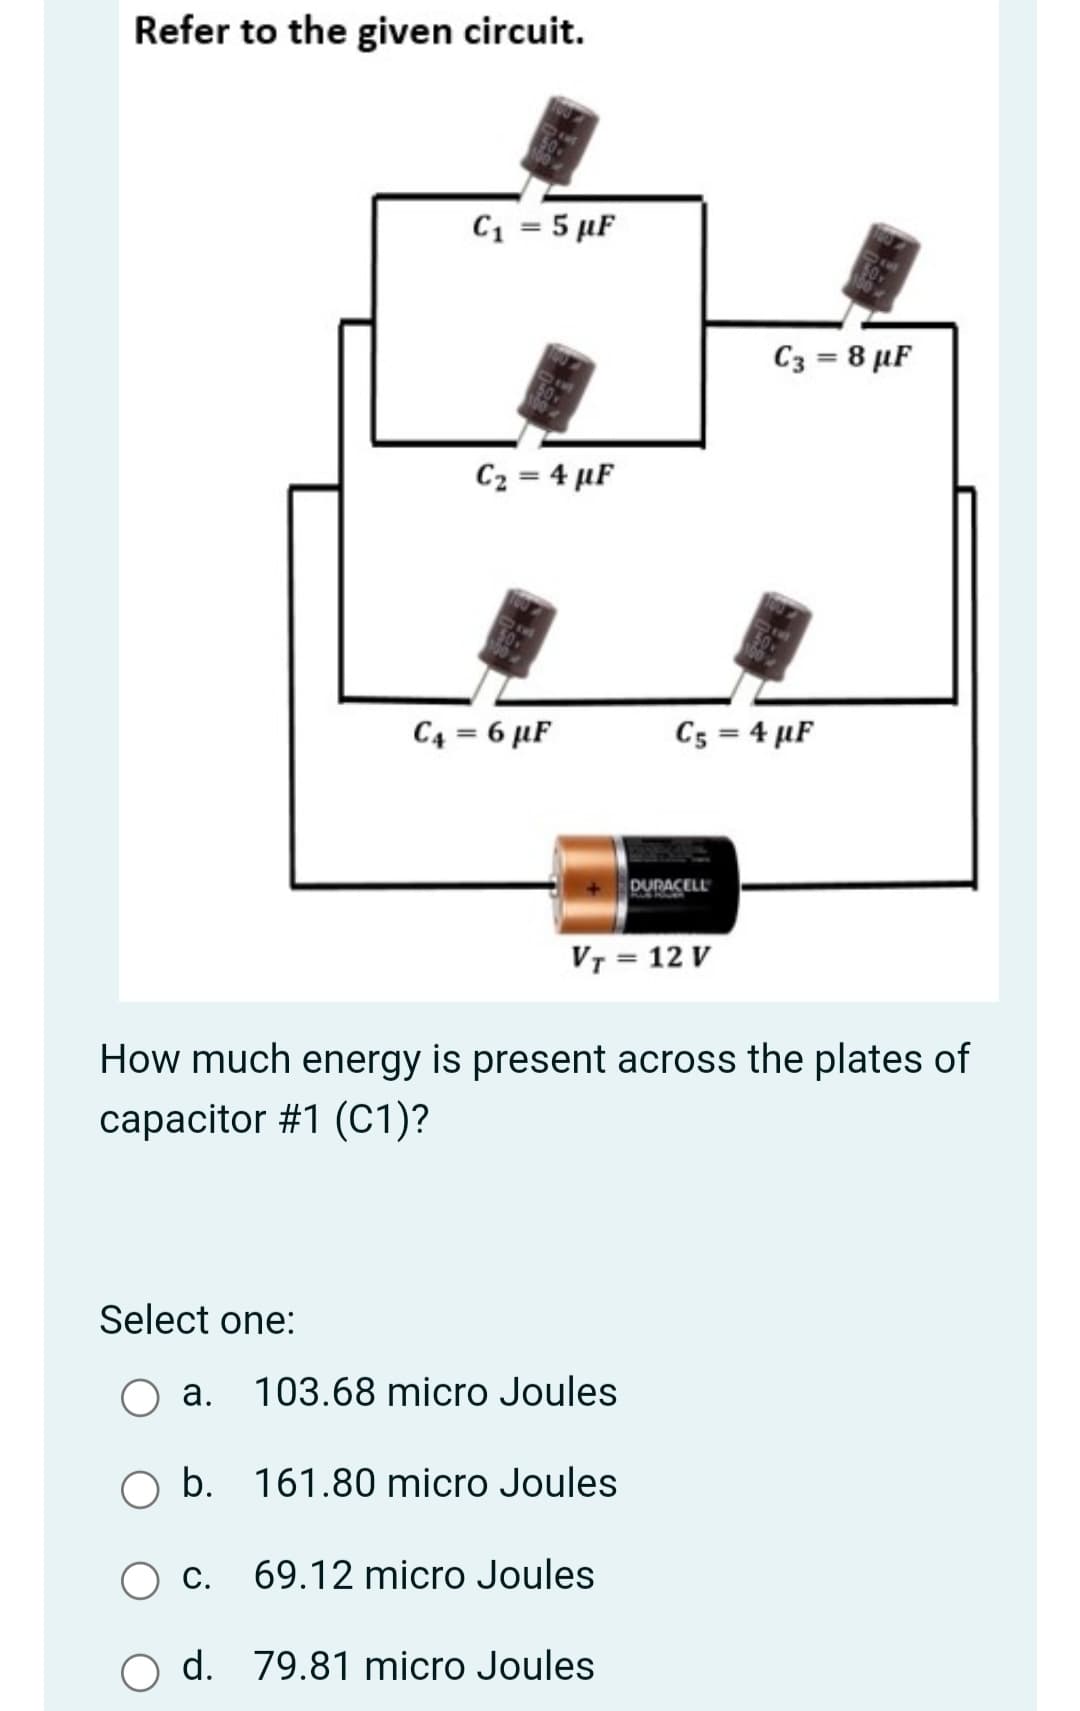 Refer to the given circuit.
C1 = 5 µF
C3 = 8 µF
C2 = 4 µF
C4 = 6 µF
C5 = 4 µF
DURACELL
VT = 12 V
How much energy is present across the plates of
capacitor #1 (C1)?
Select one:
а.
103.68 micro Joules
b. 161.80 micro Joules
С.
69.12 micro Joules
d. 79.81 micro Joules
